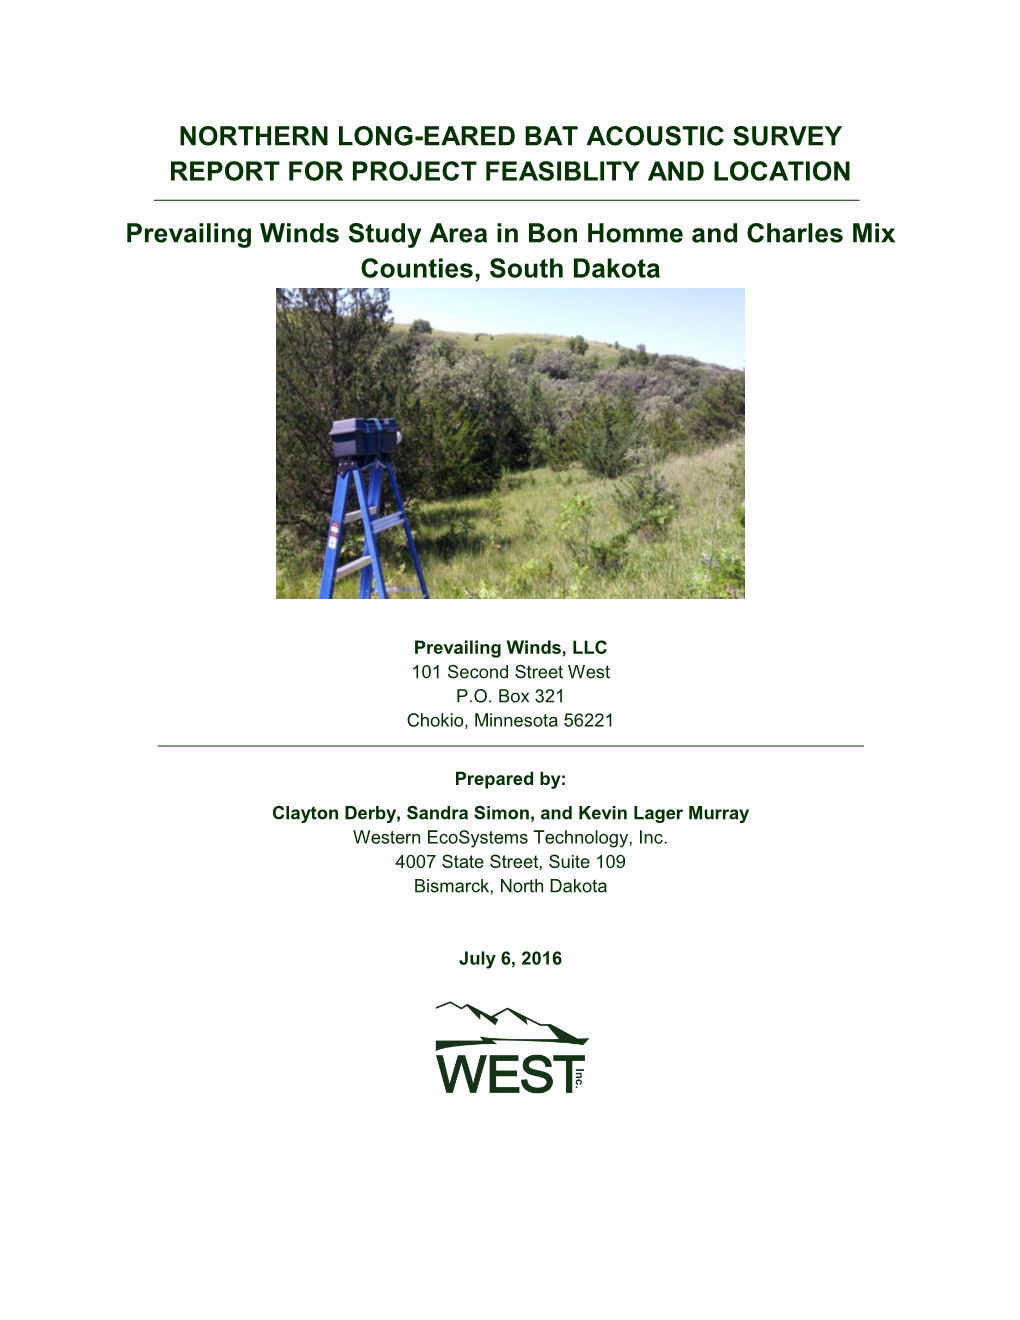 NORTHERN LONG-EARED BAT ACOUSTIC SURVEY REPORT for PROJECT FEASIBLITY and LOCATION Prevailing Winds Study Area in Bon Homme